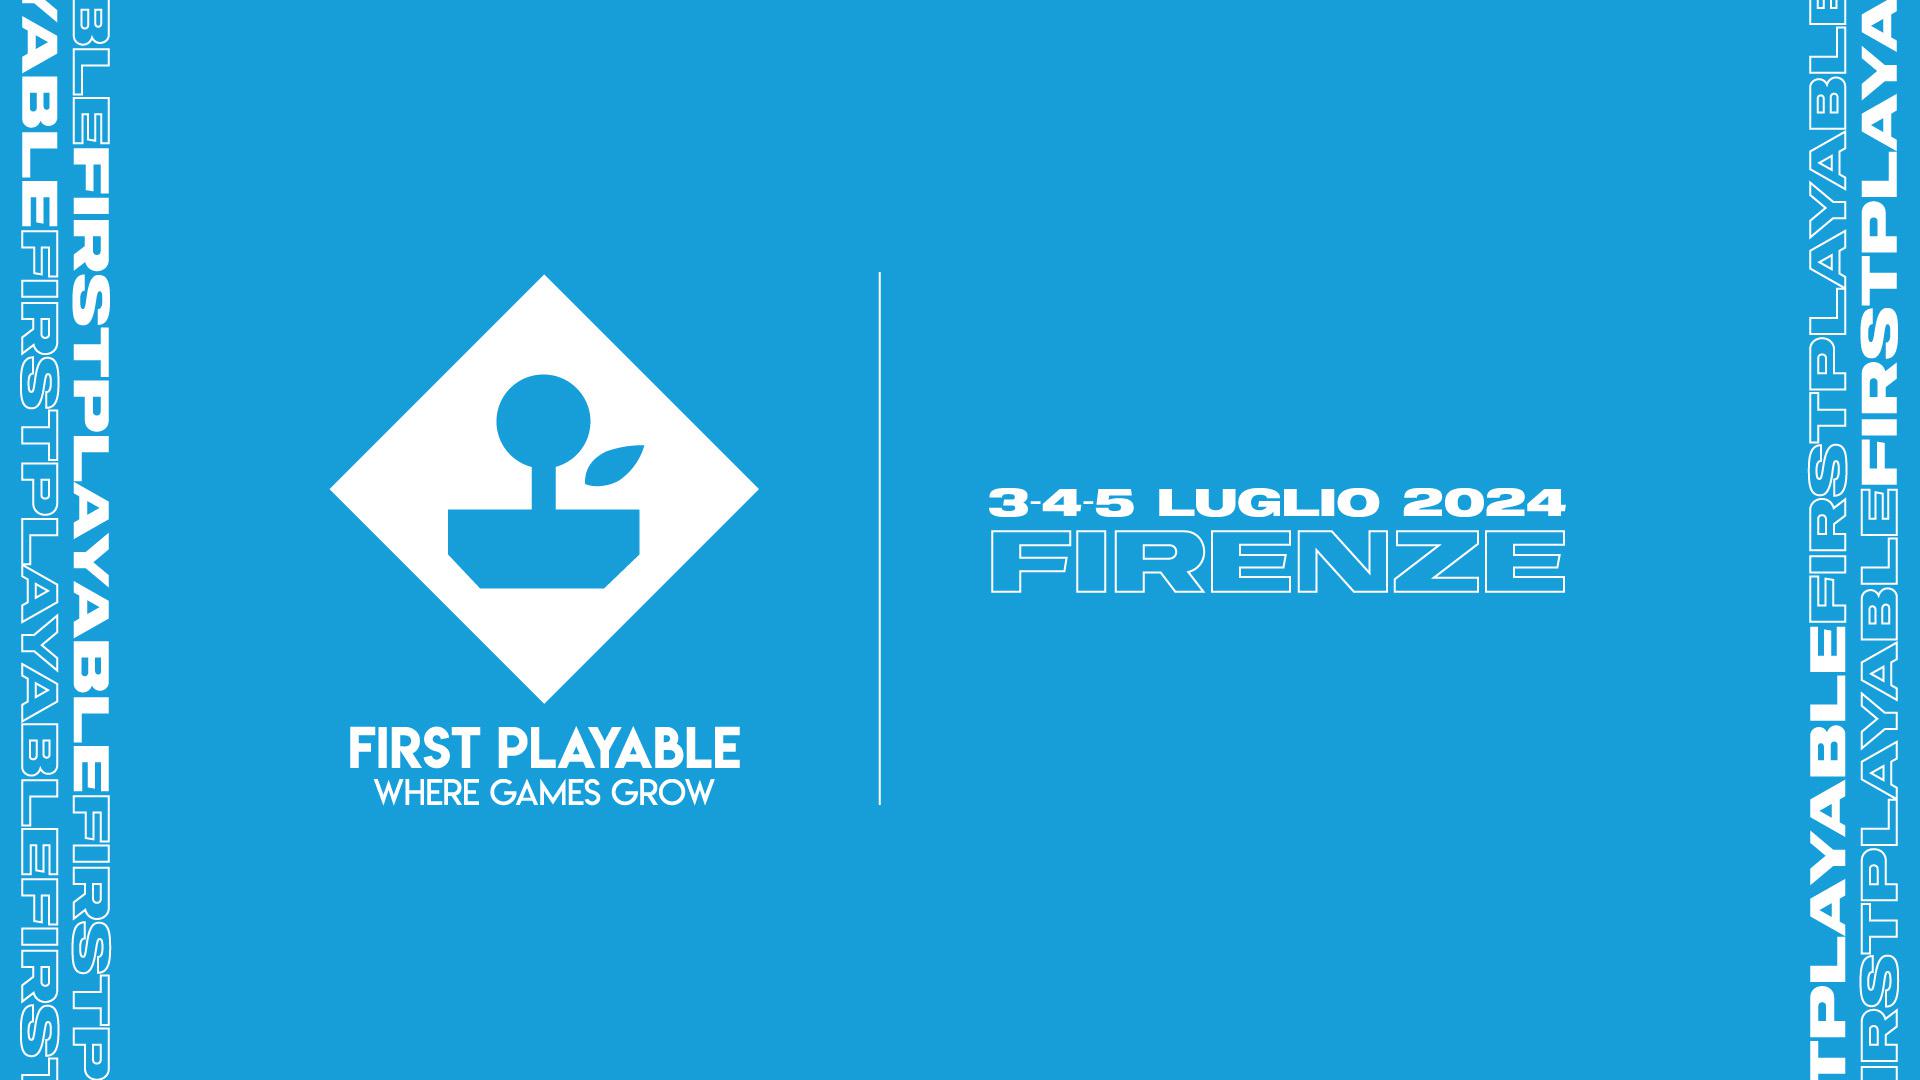 Florence hosts gathering of Italian video game industry